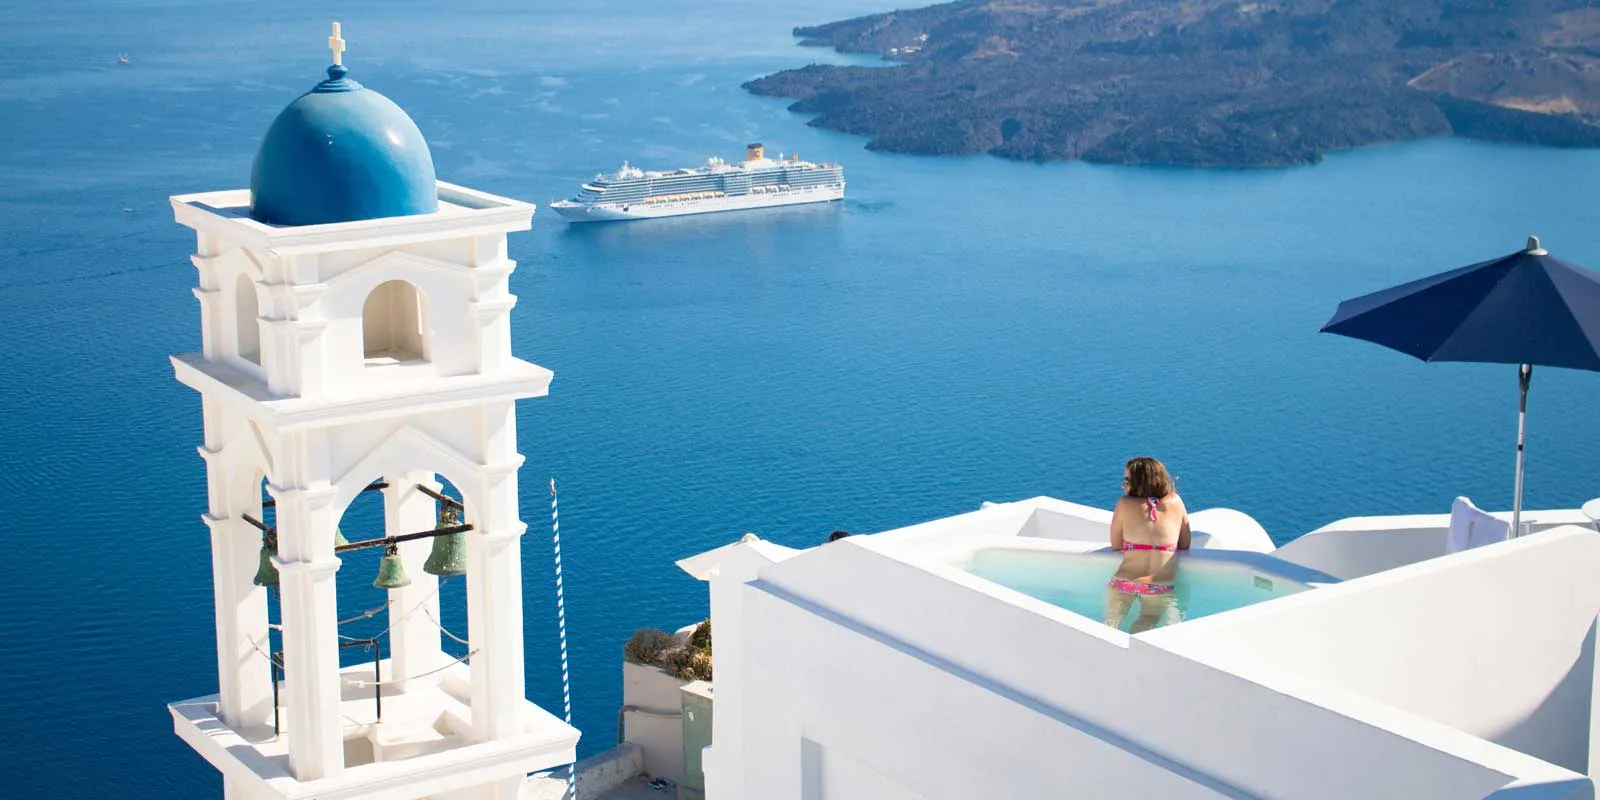 Ocean landscape view of Santorini, Greece showing a white bell tower with a blue dome, a woman in a rooftop pool, and a cruise ship in the distance.